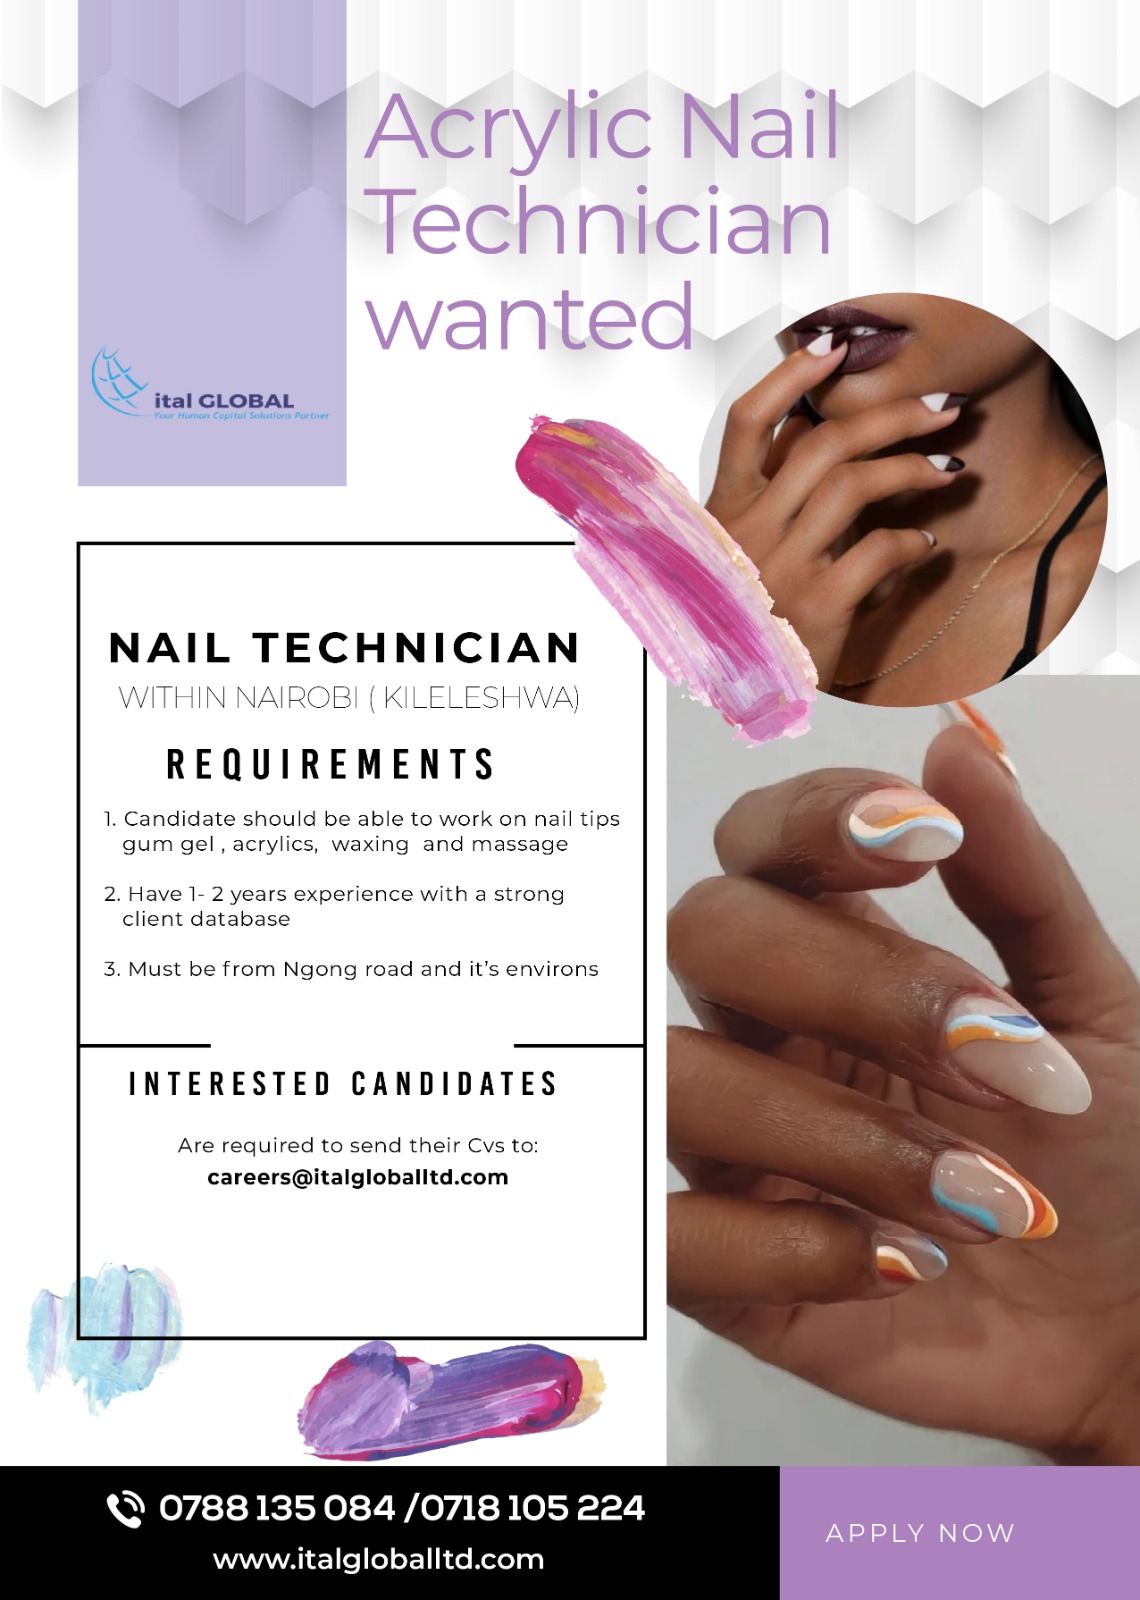 Nail technician Job and Salary in France - Jobs and Wages in France -  YouTube